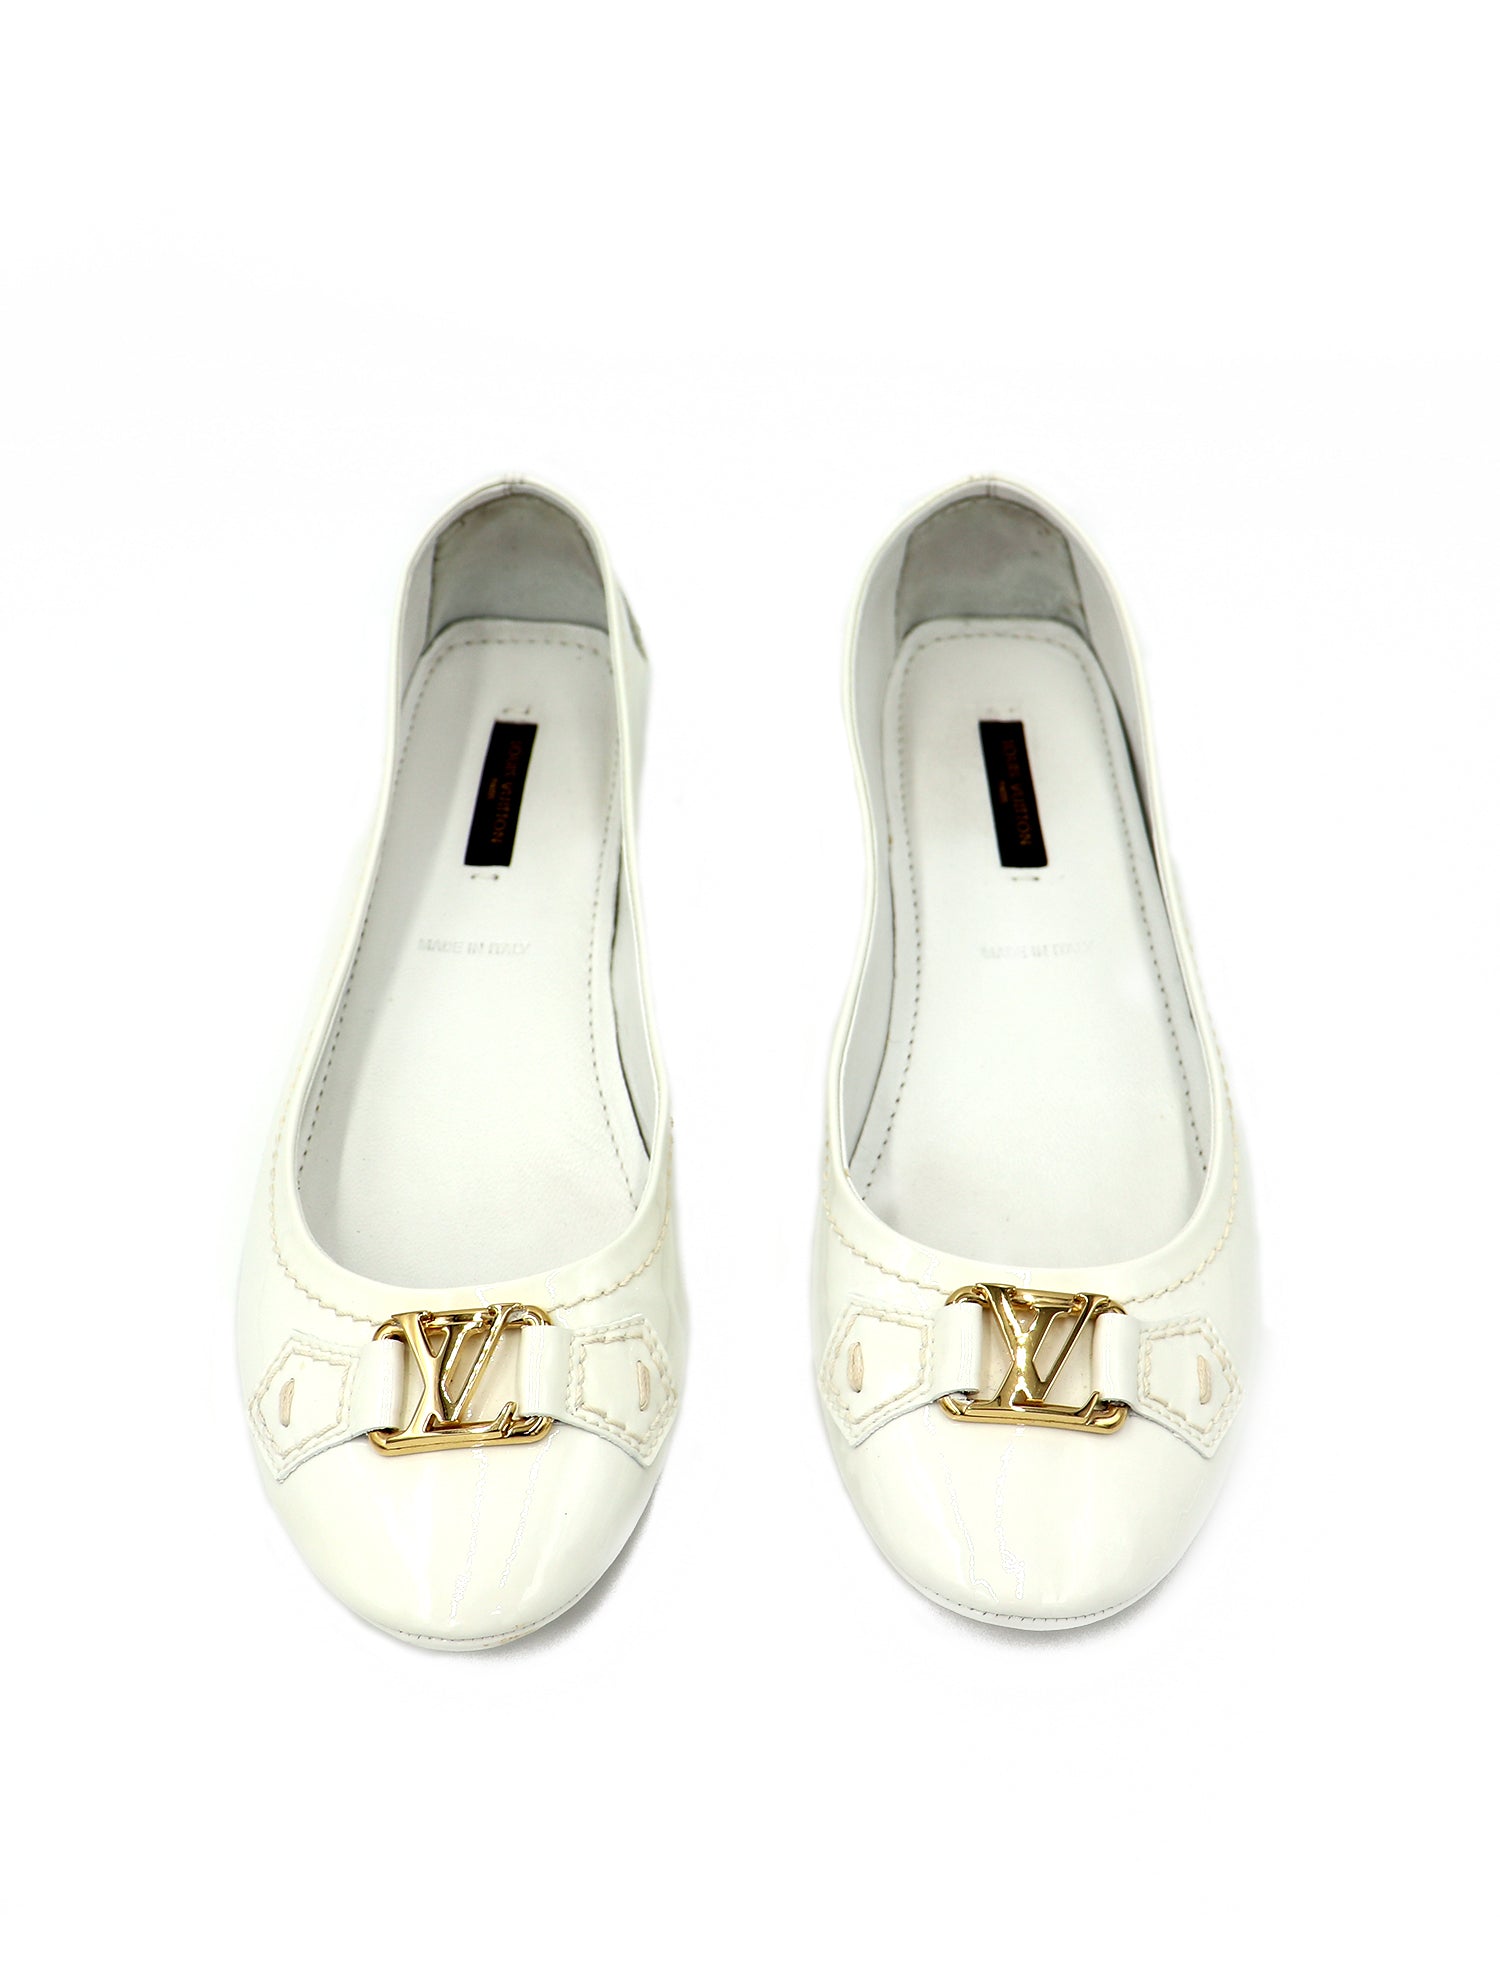 Academy leather flats Louis Vuitton White size 36 EU in Leather - 30649782